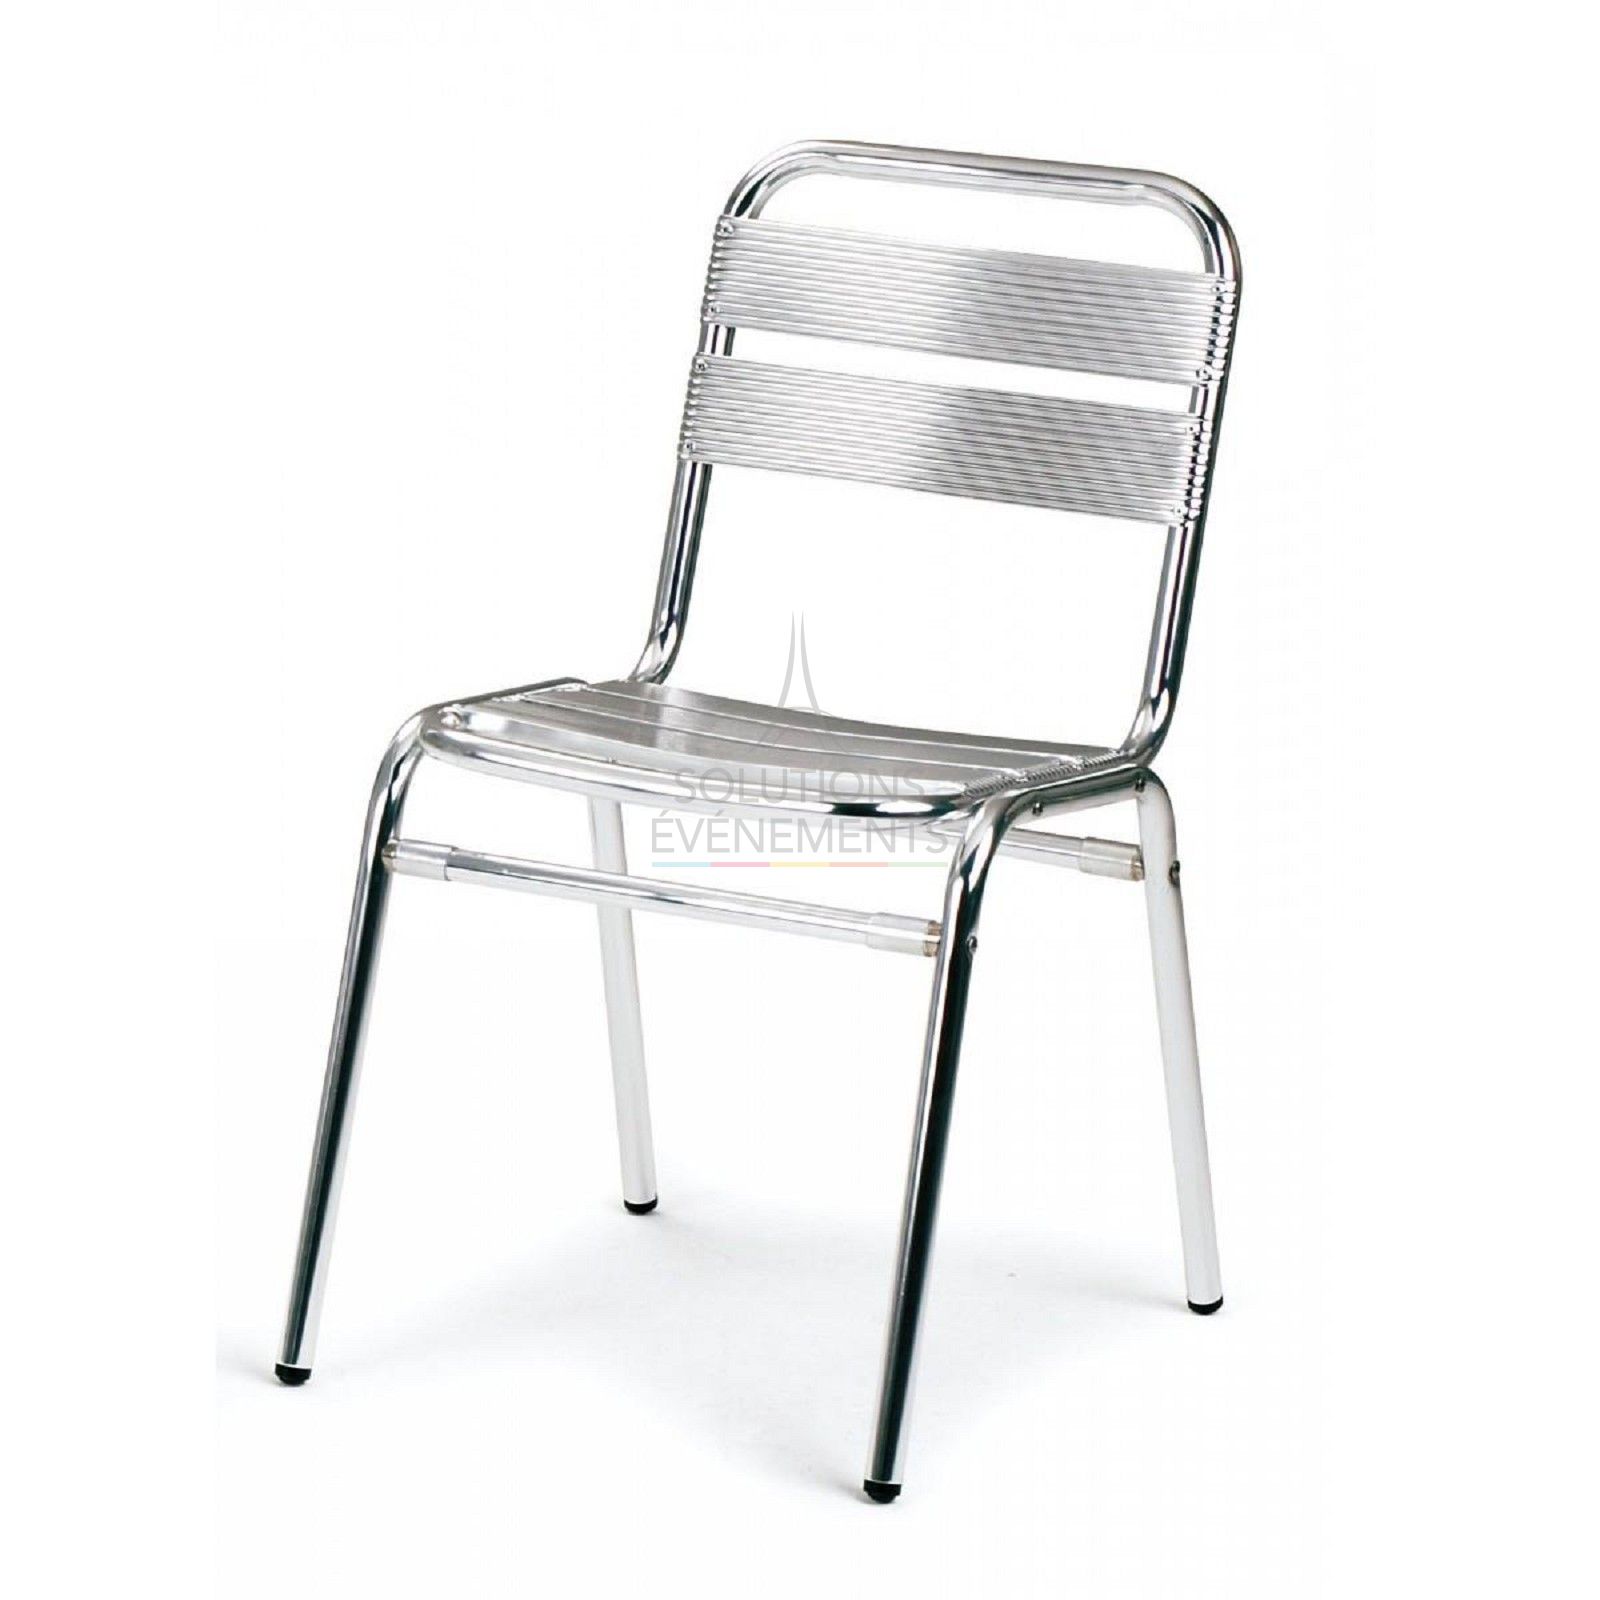 Aluminum and stainless steel bistro chair rental